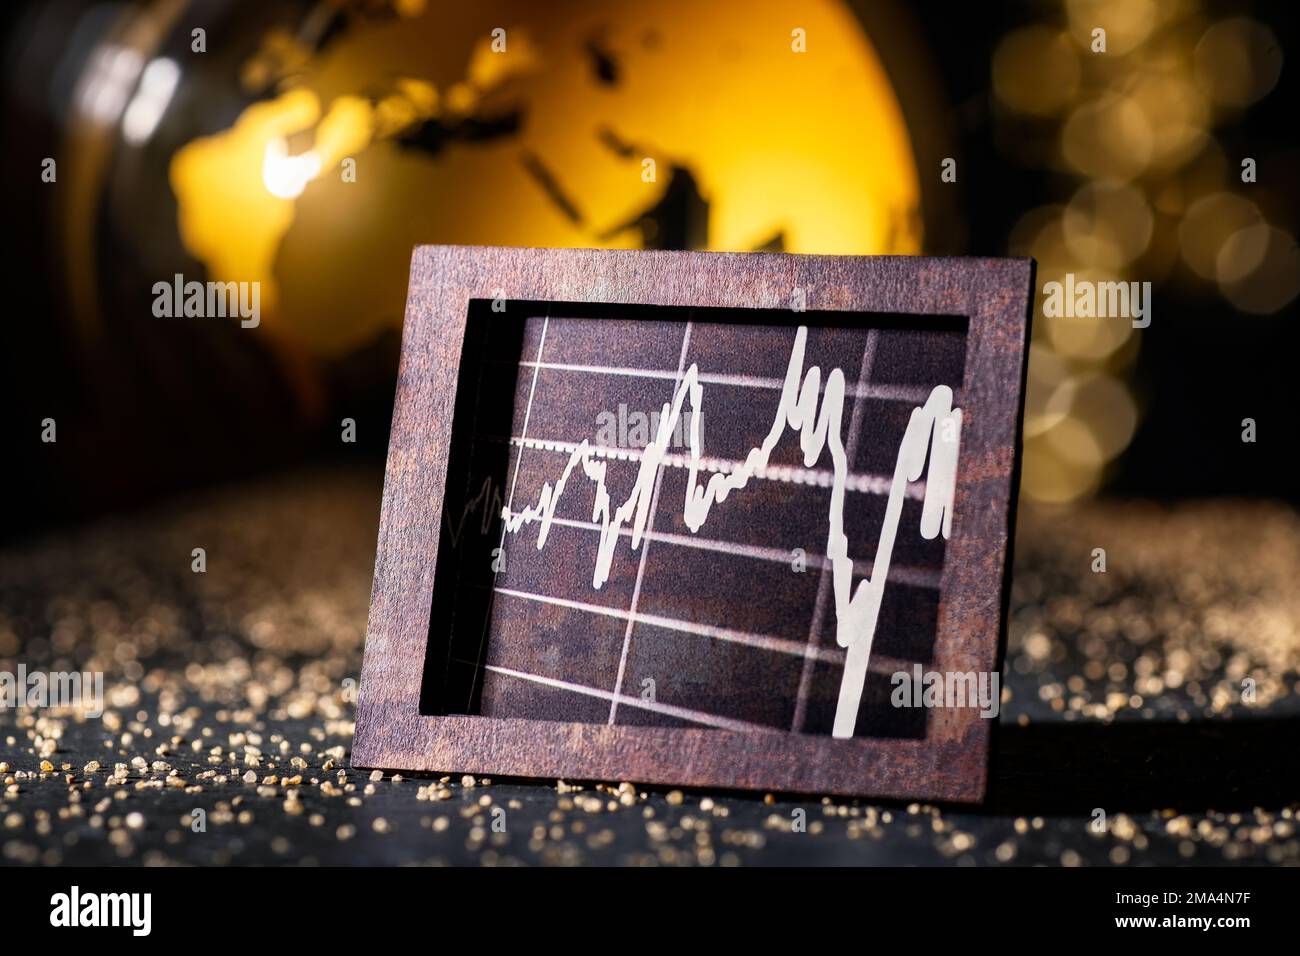 International economy and finance. Graphic in old metal frame in front of golden globe. Stock Photo